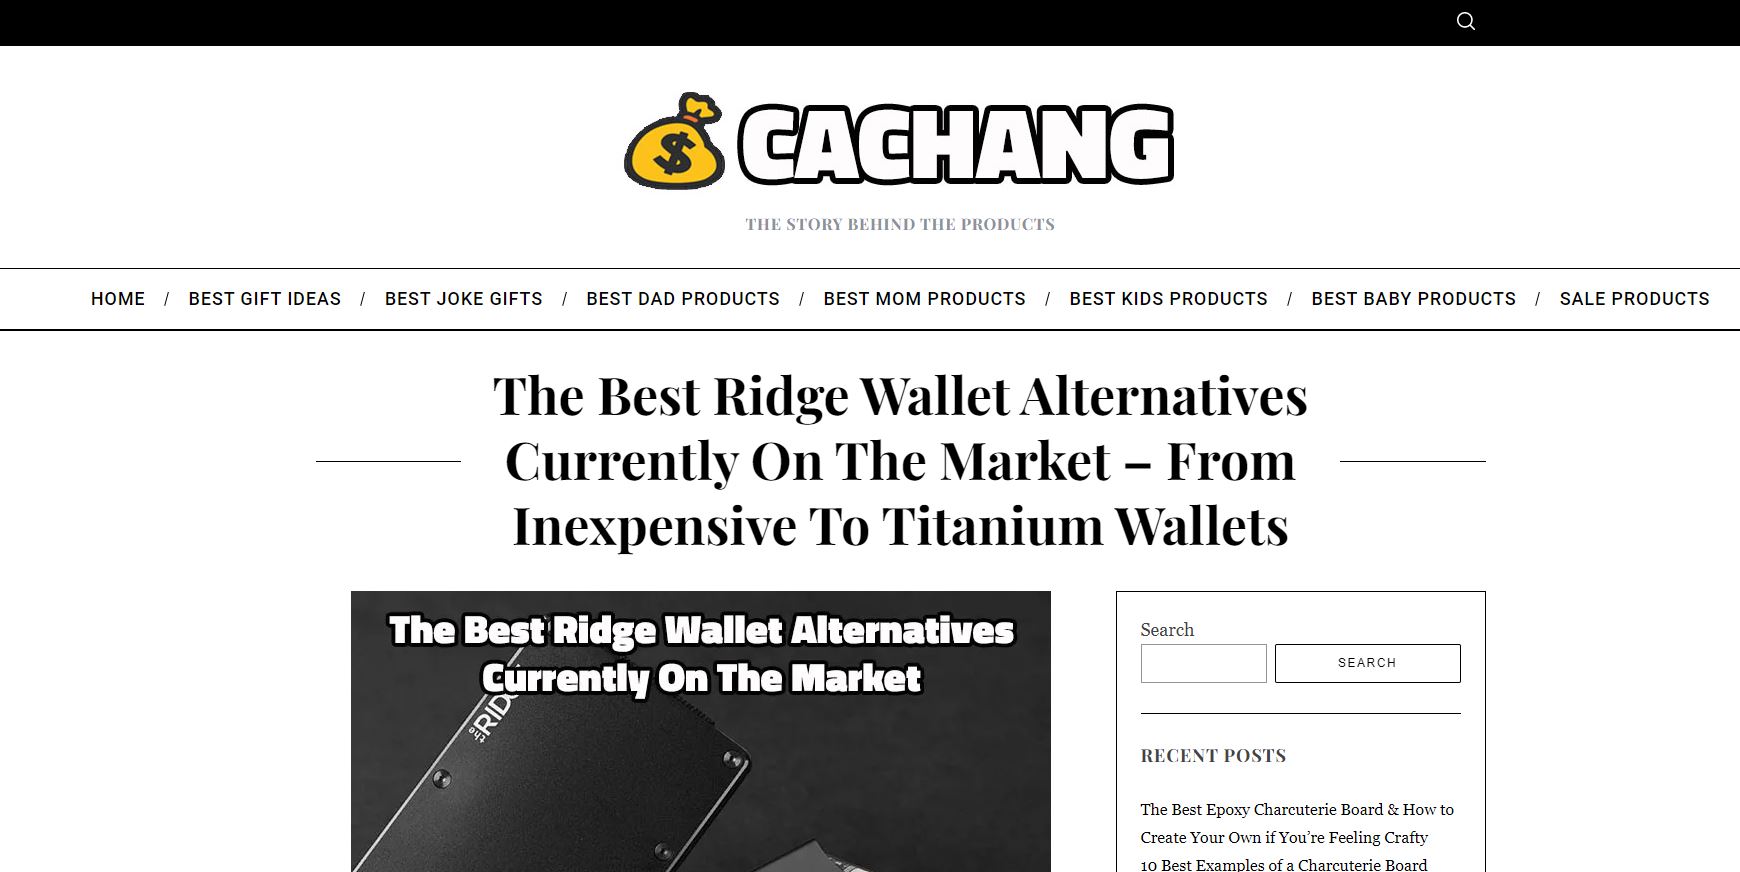 Are You Looking For The Best Ridge Wallet Alternatives